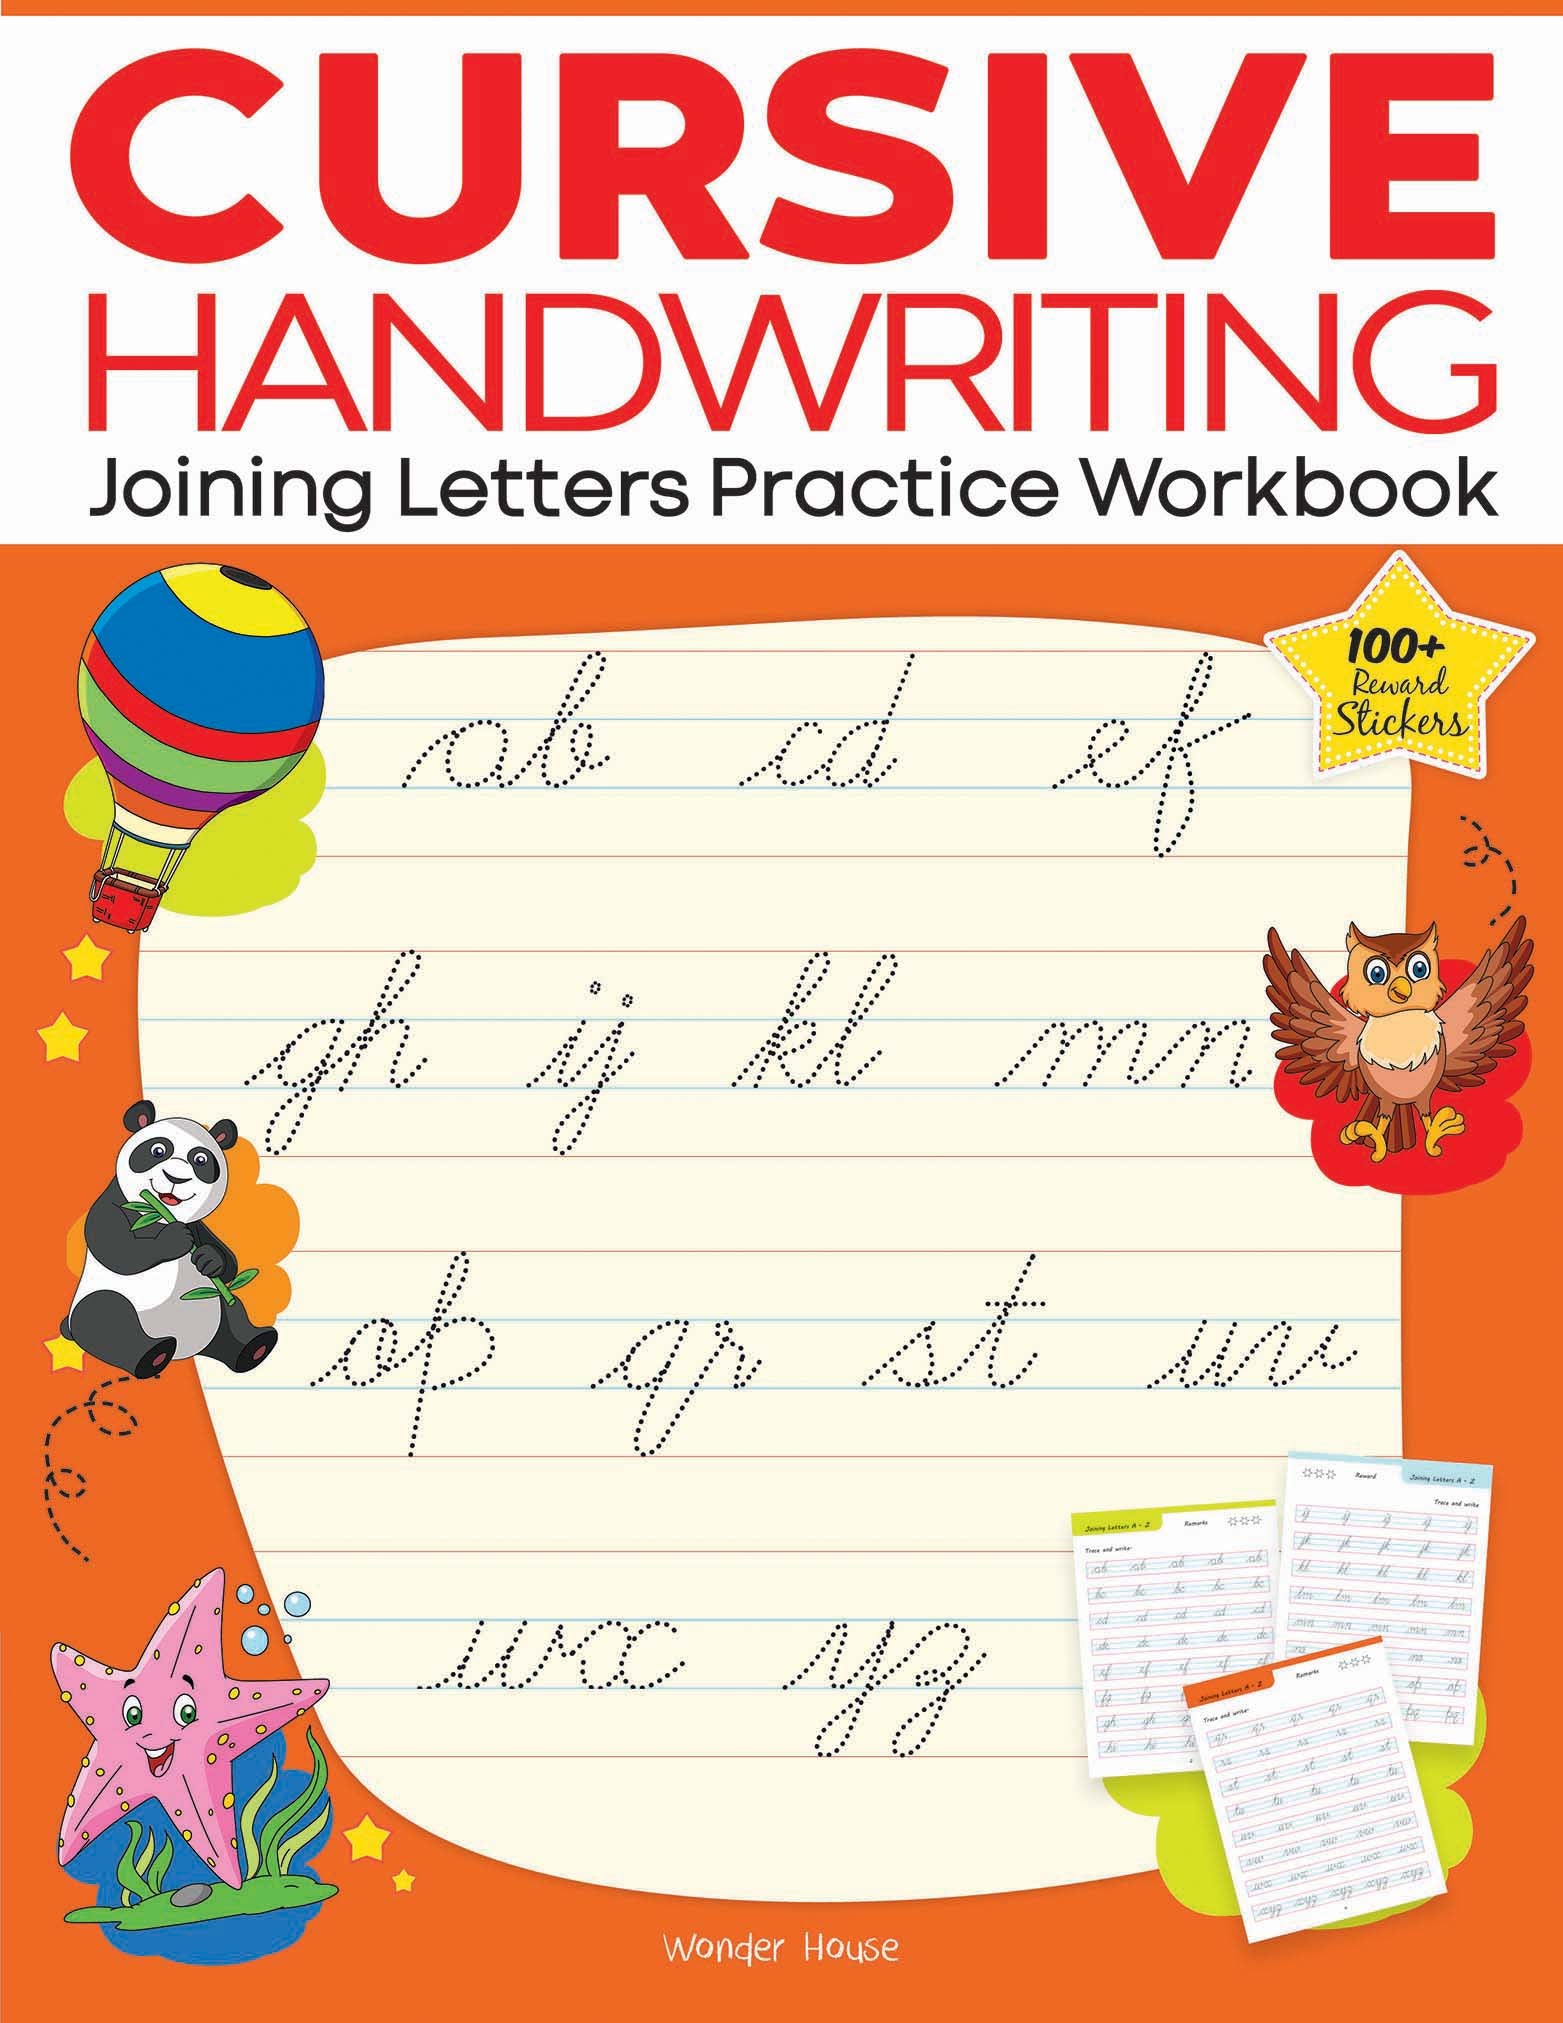 Book　Letters:　Children　at　Cursive　available　Practice　Joining　Handwriting　Online　Workbook　For